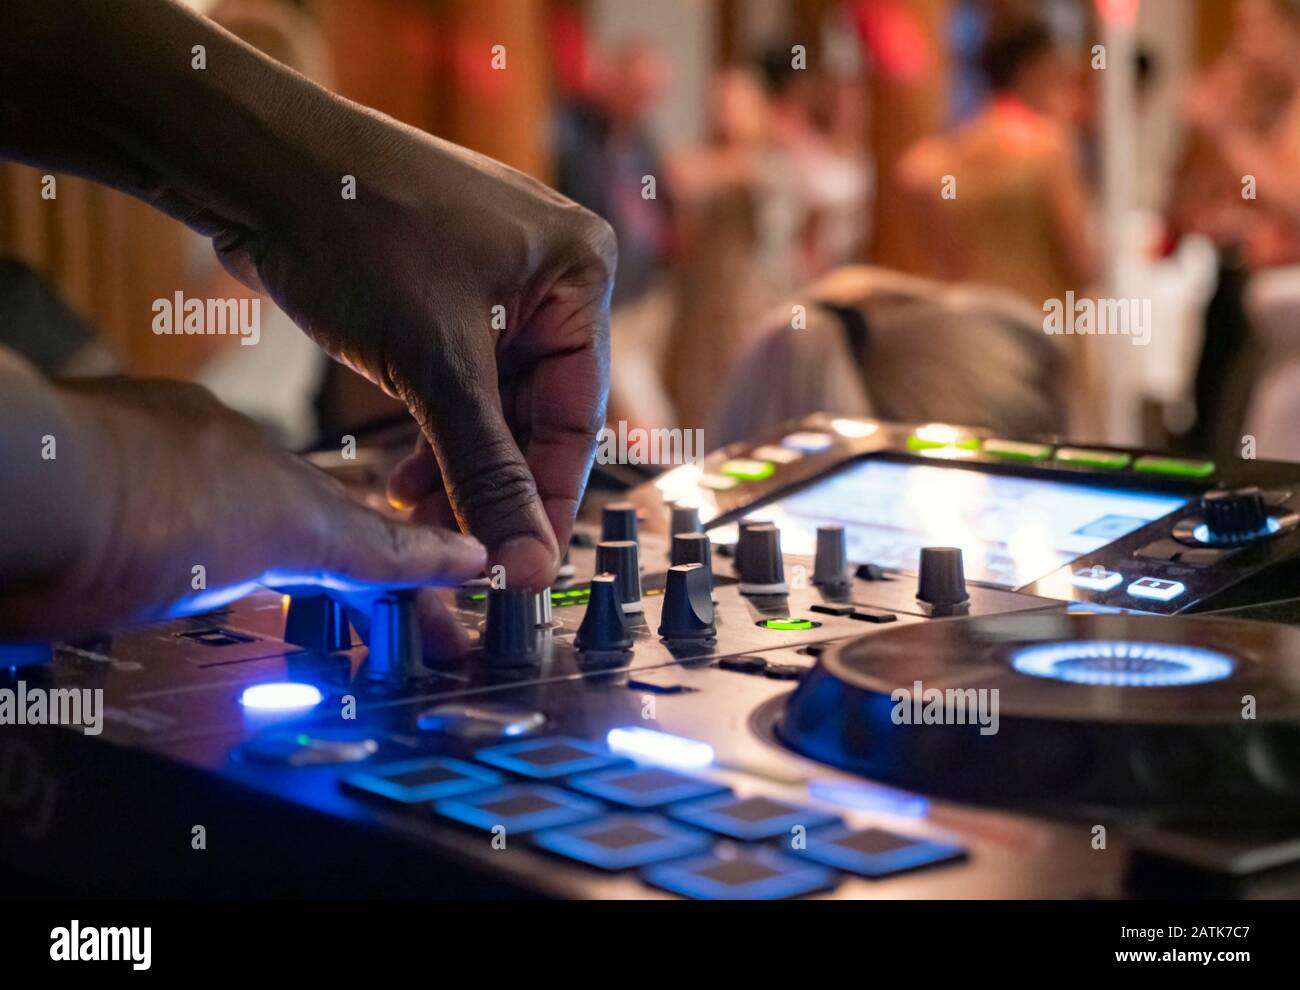 dj club dance party background with sound mixer console Stock Photo - Alamy